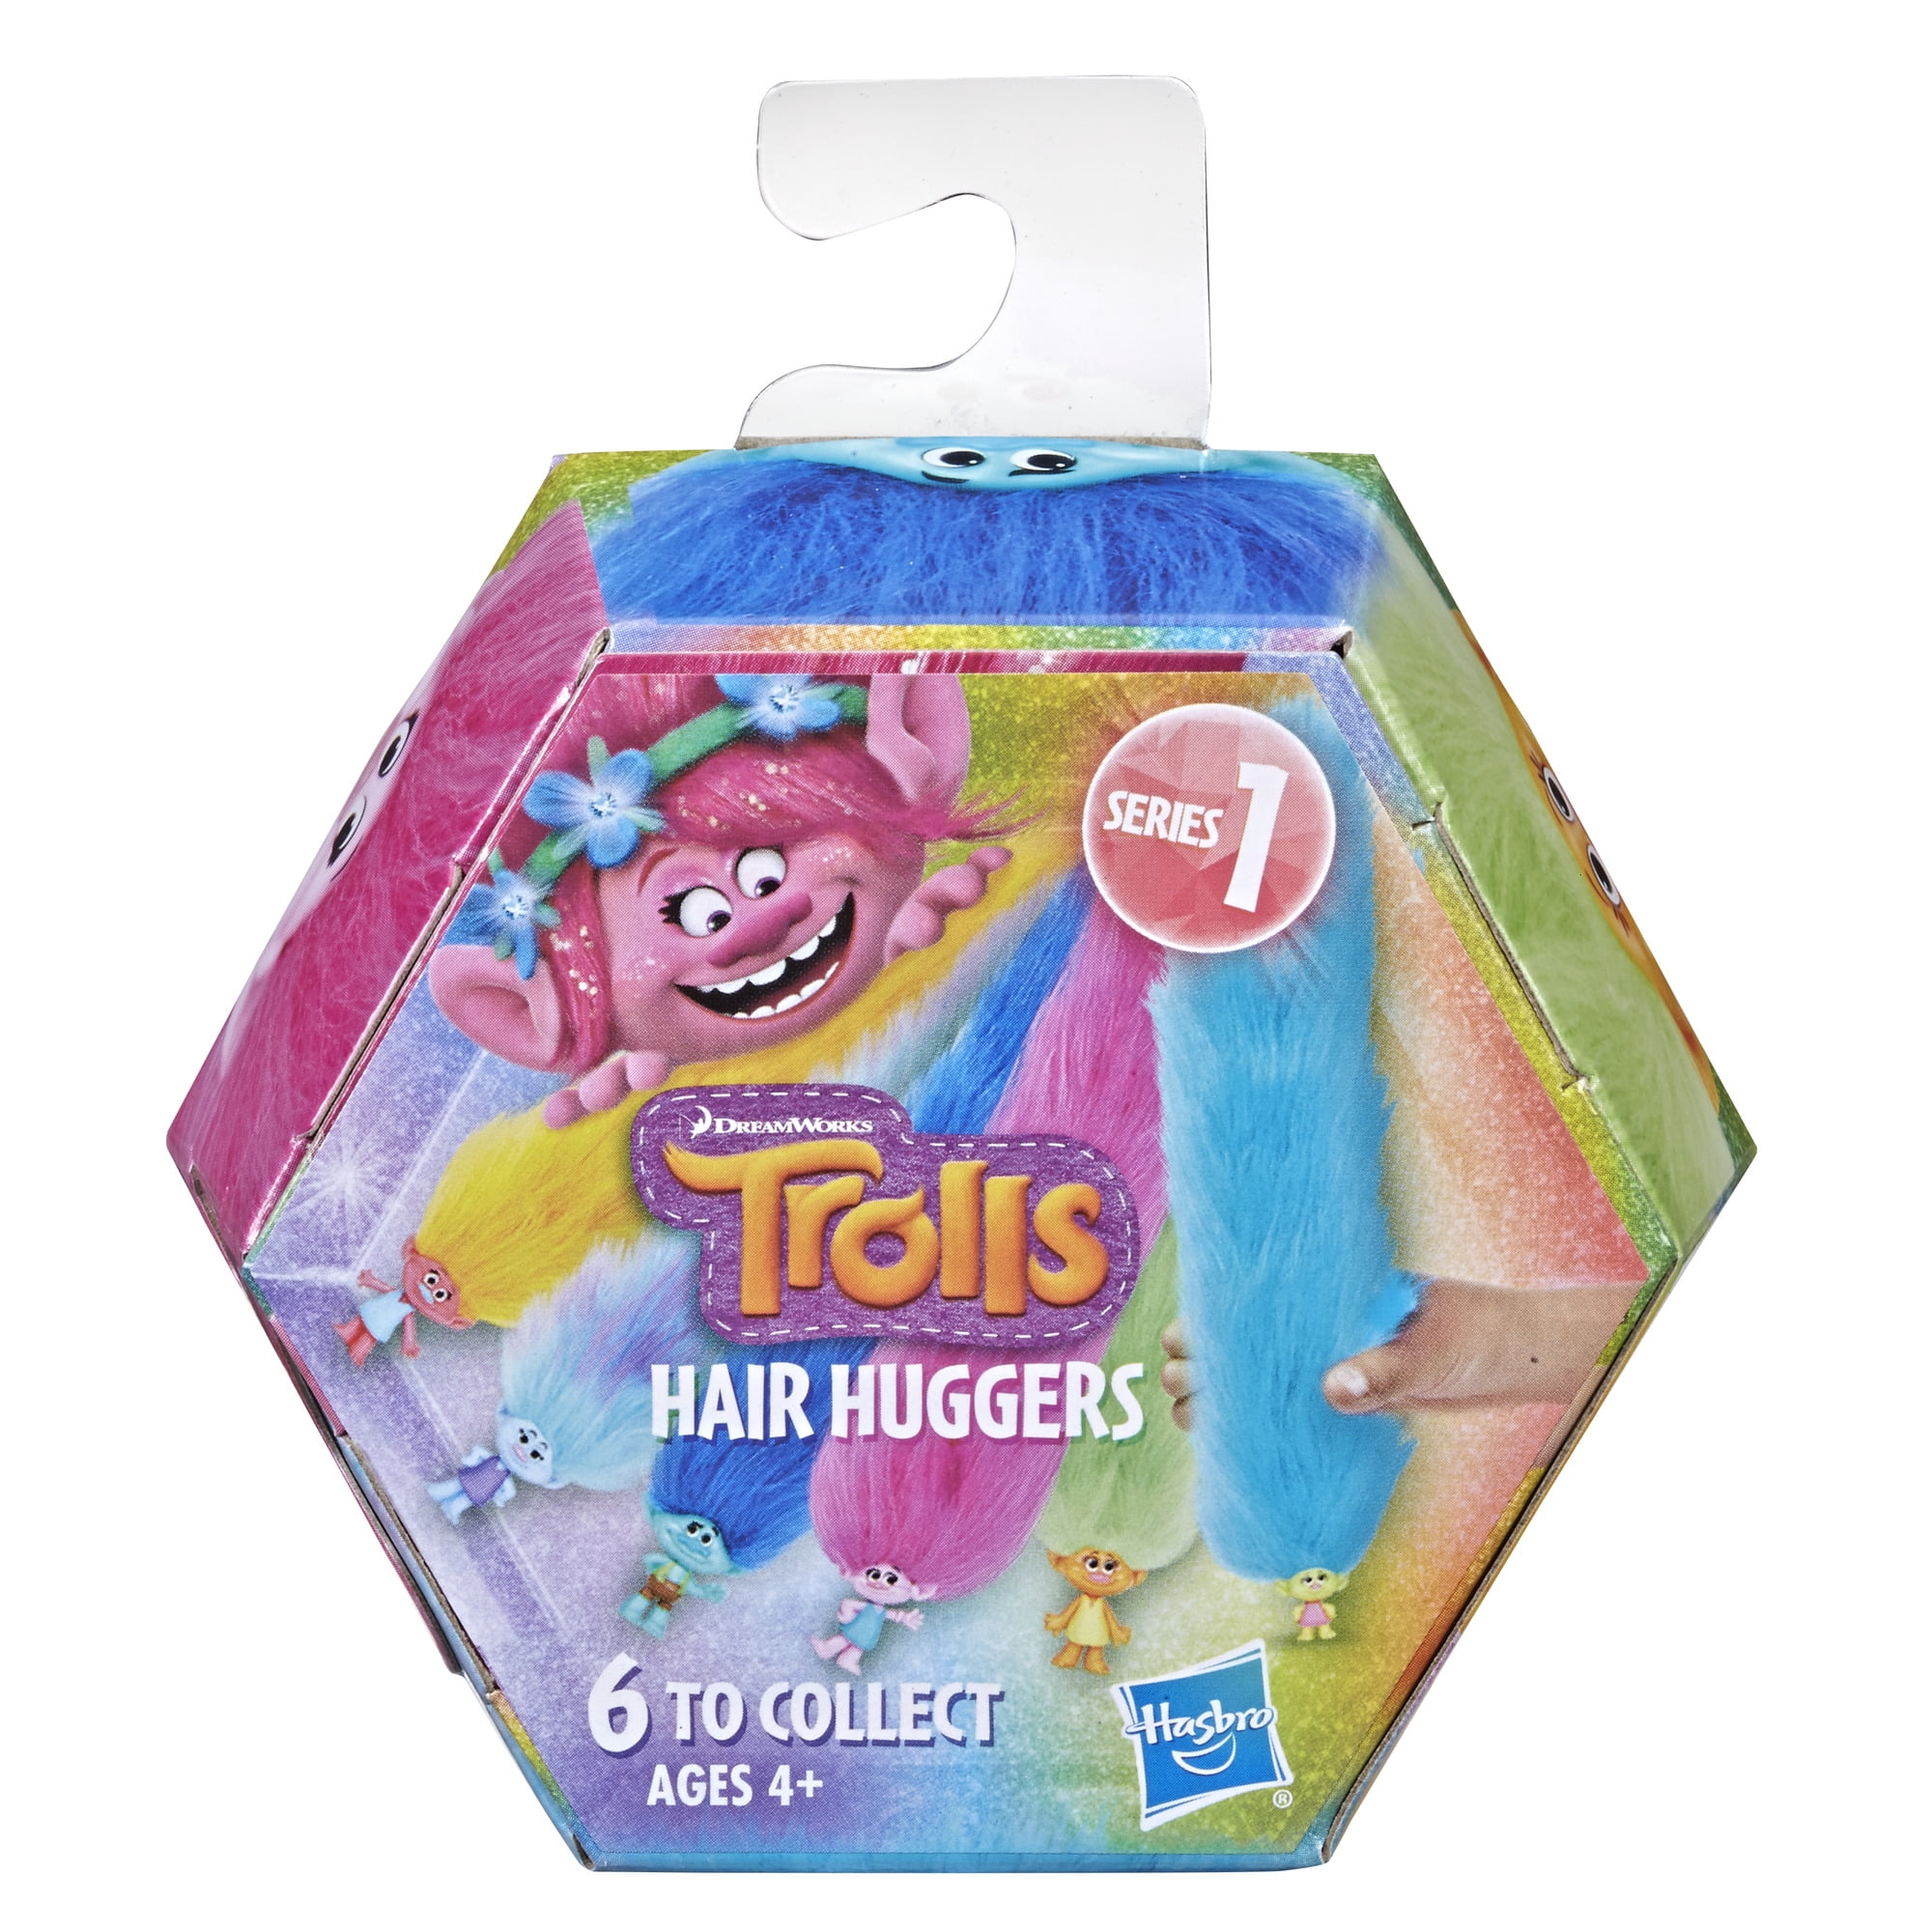 Six Colors Dreamworks Trolls Hair Huggers by Hasbro Collectable 